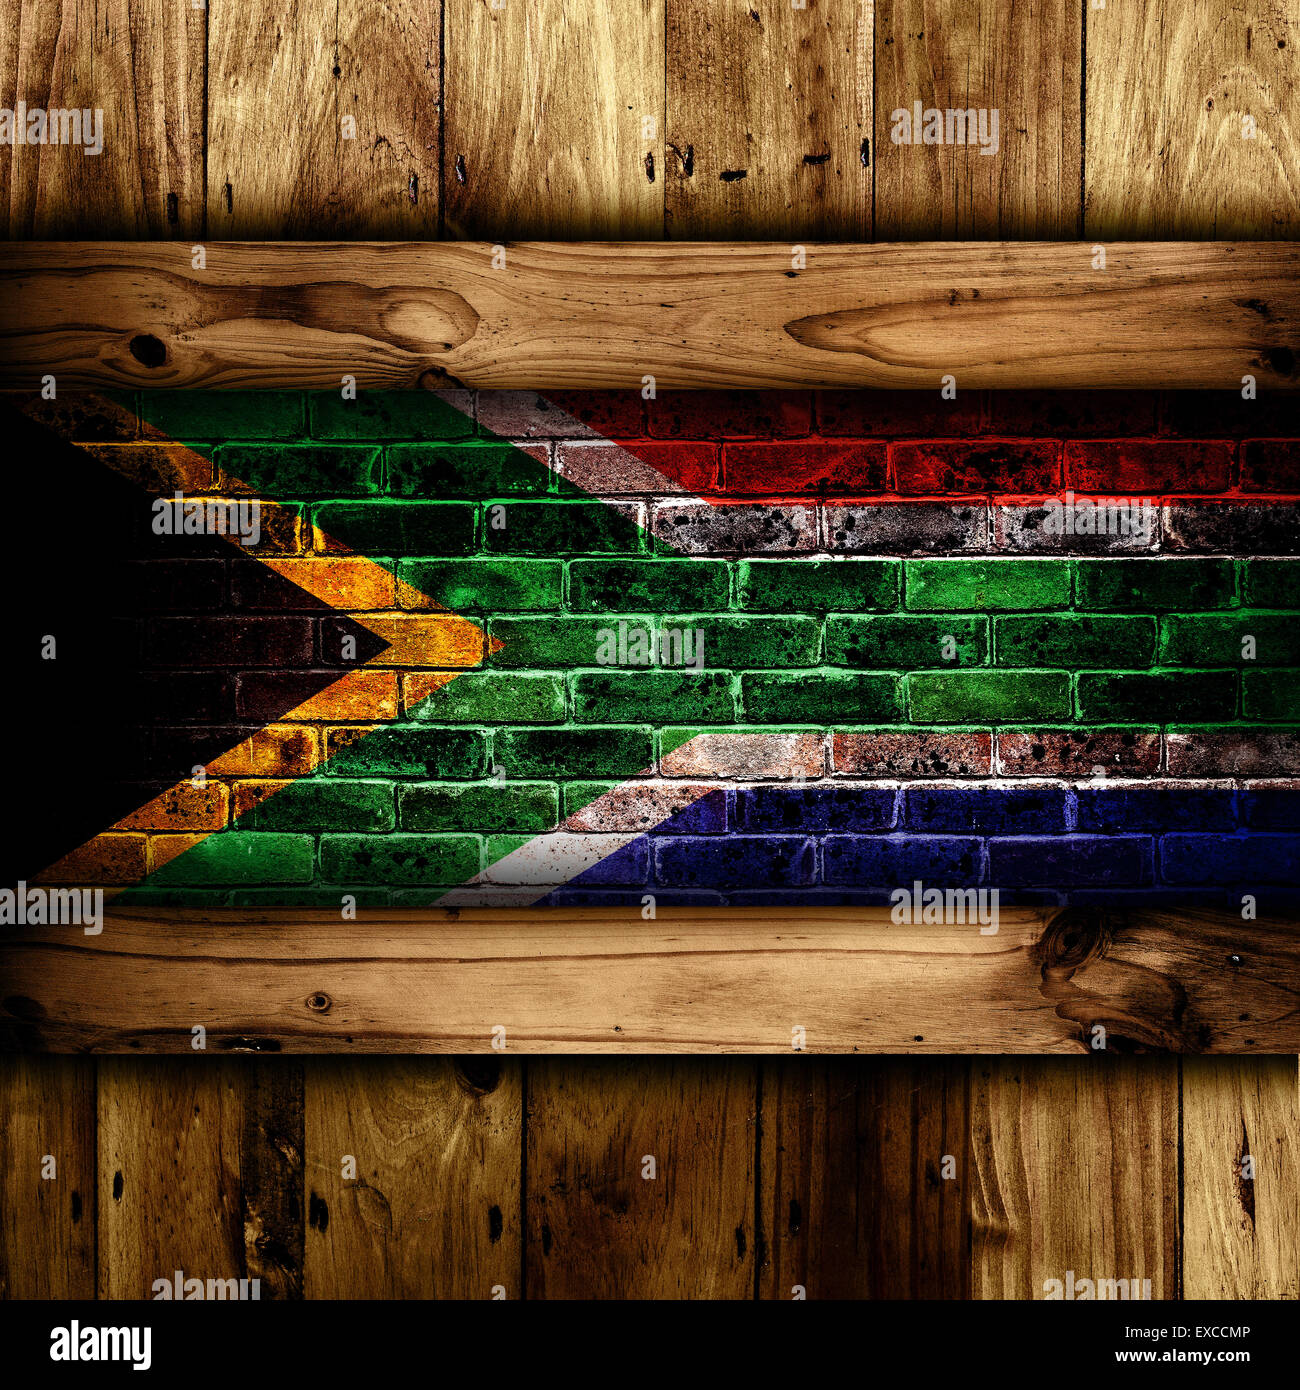 Abstract background of a South African flag on a brick wall framed by wooden panels. Stock Photo